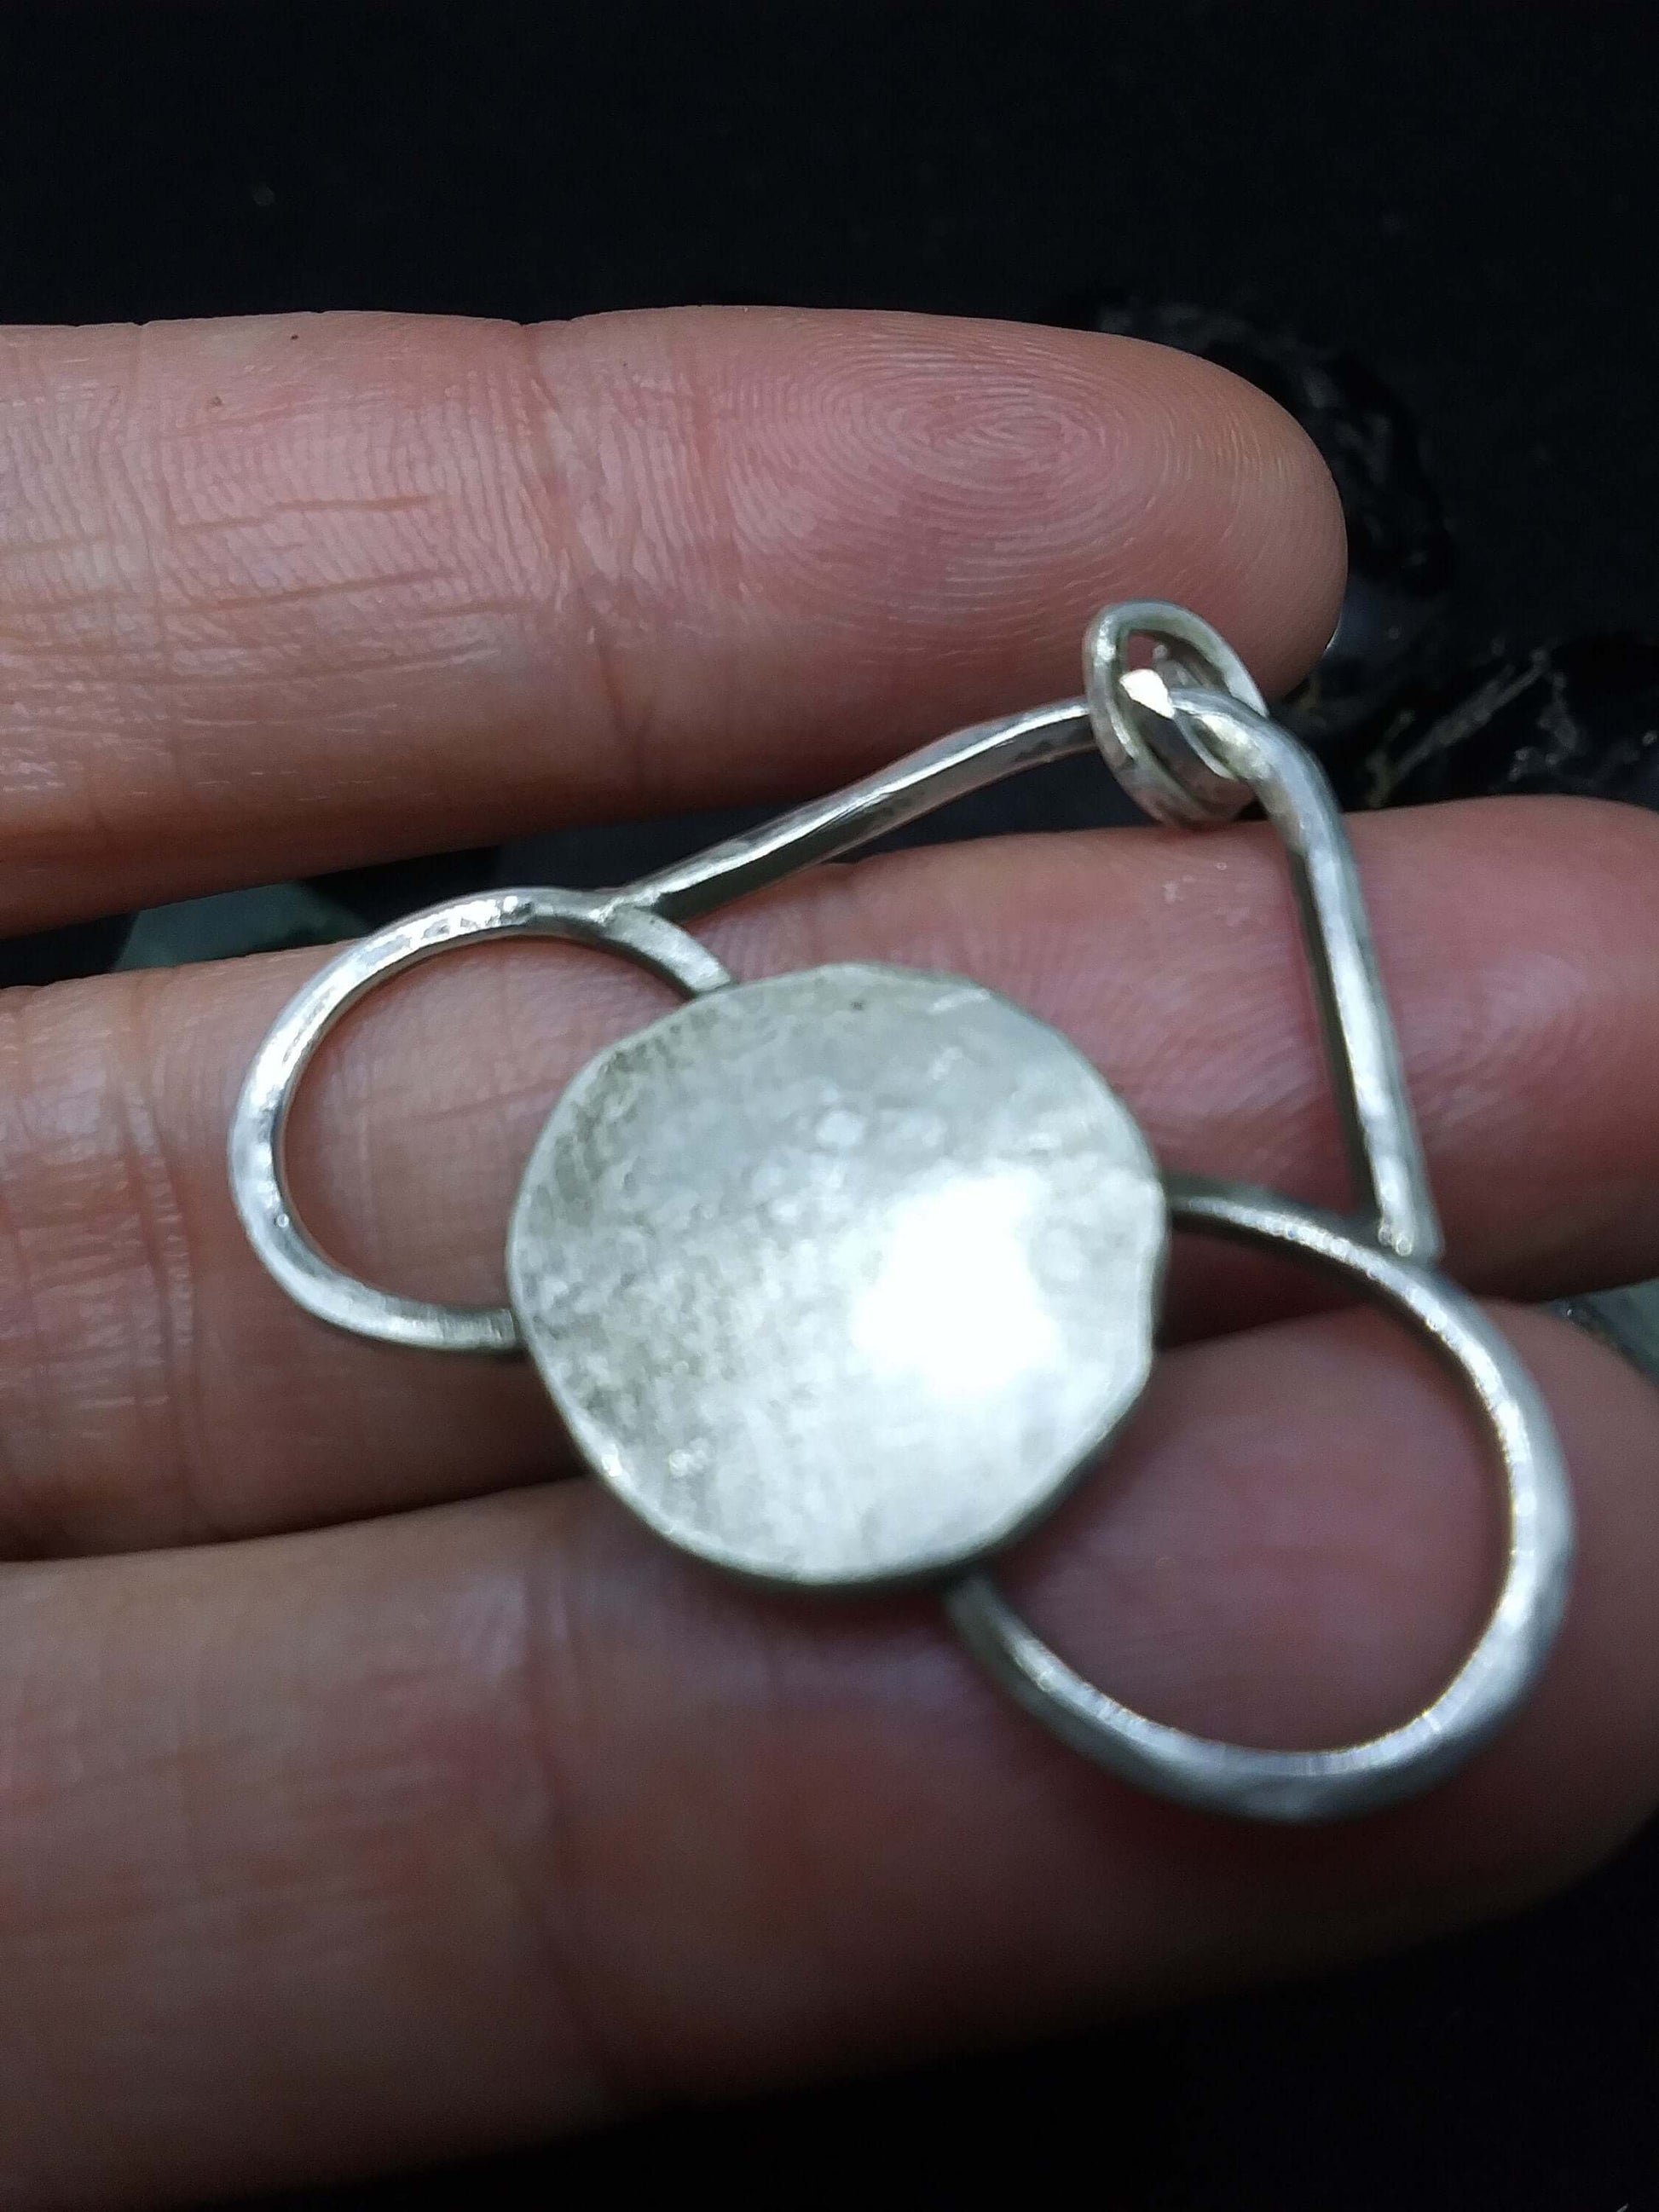  Back side of medium sized silver pendant with dark patina that depicts a horizontal eternity symbol inlaid over a full moon on palm side of fingers.